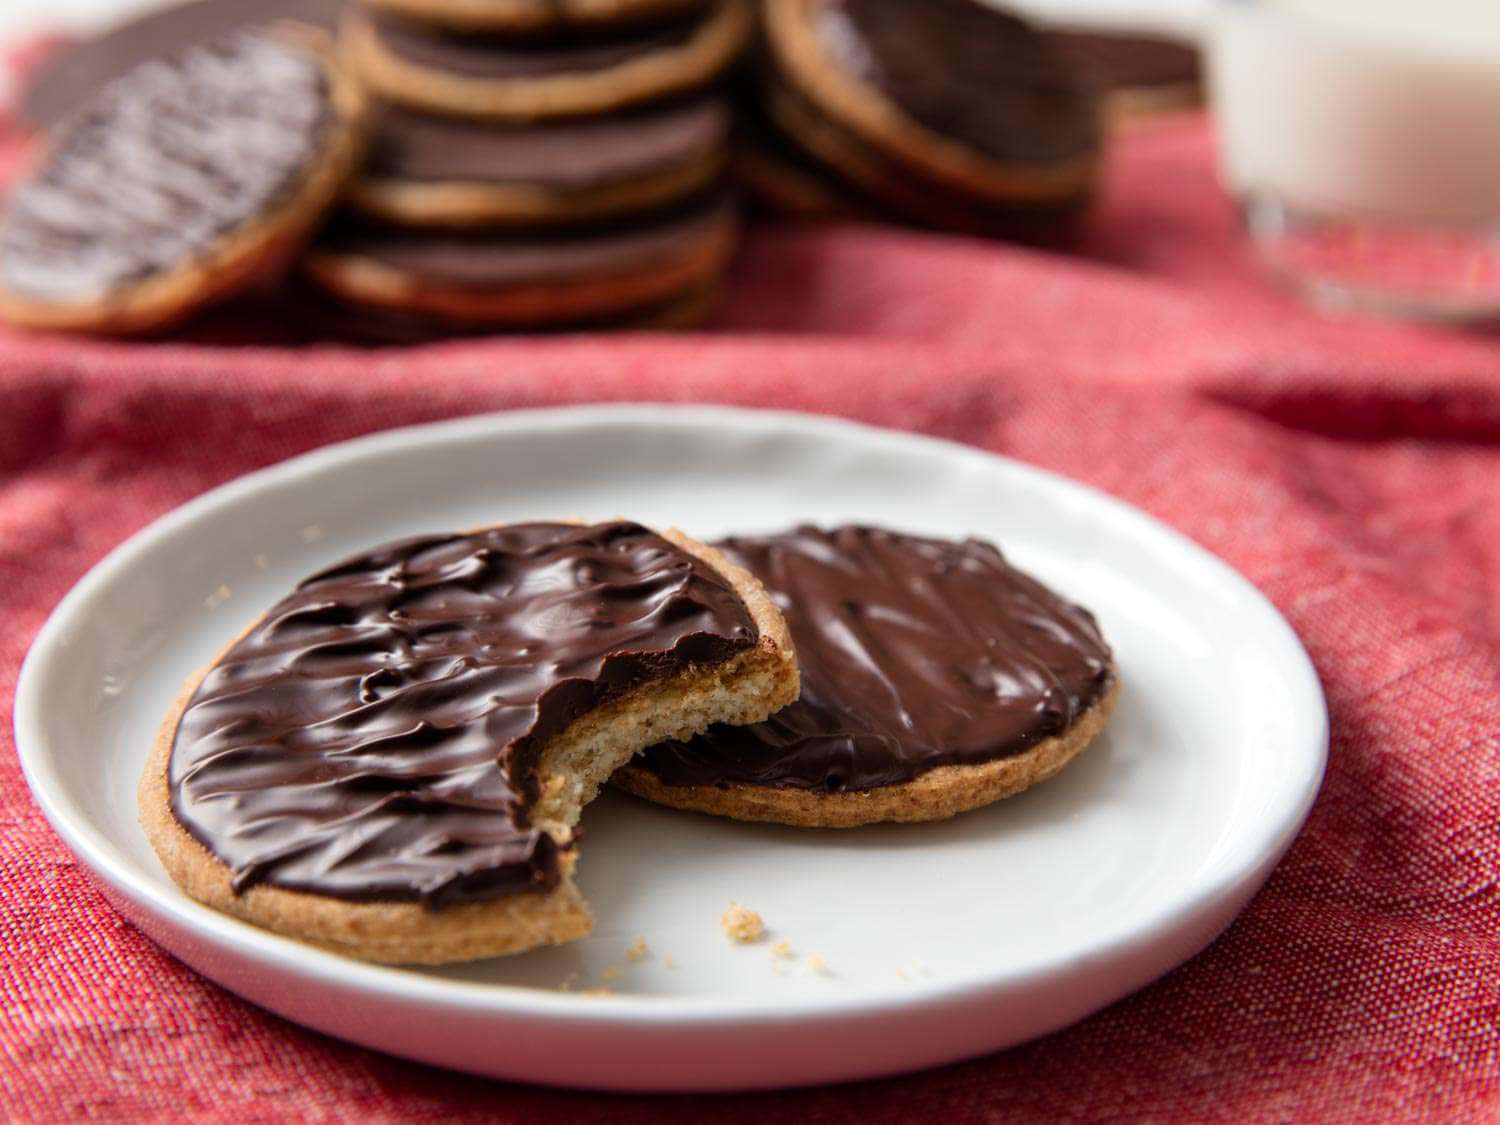 Chocolate Dipped Cookies On A Plate With Milk